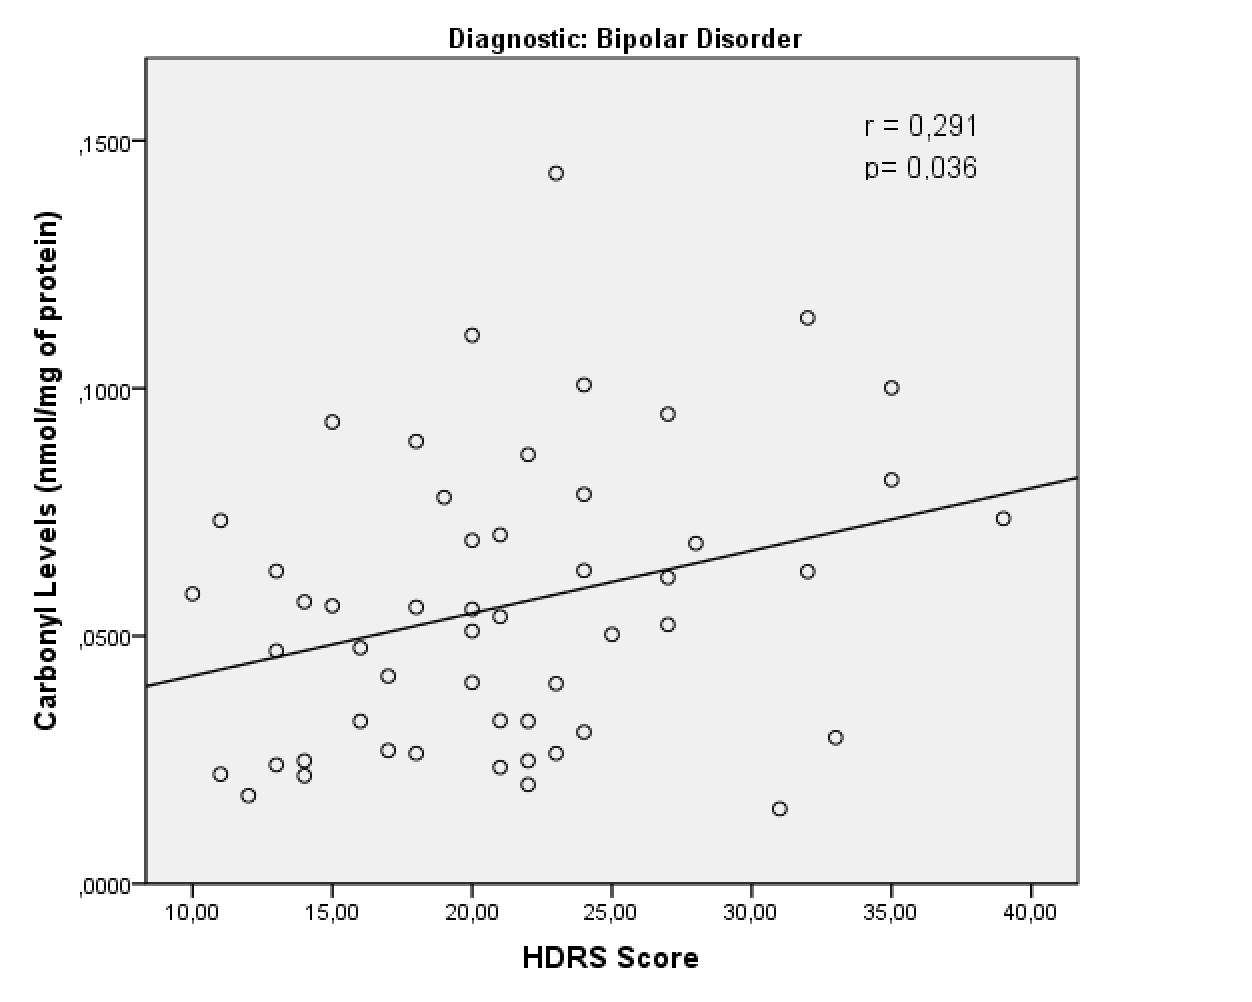 Figure 6. Correlation between HDRS and Protein Carbonyl levels in bipolar depression patients.